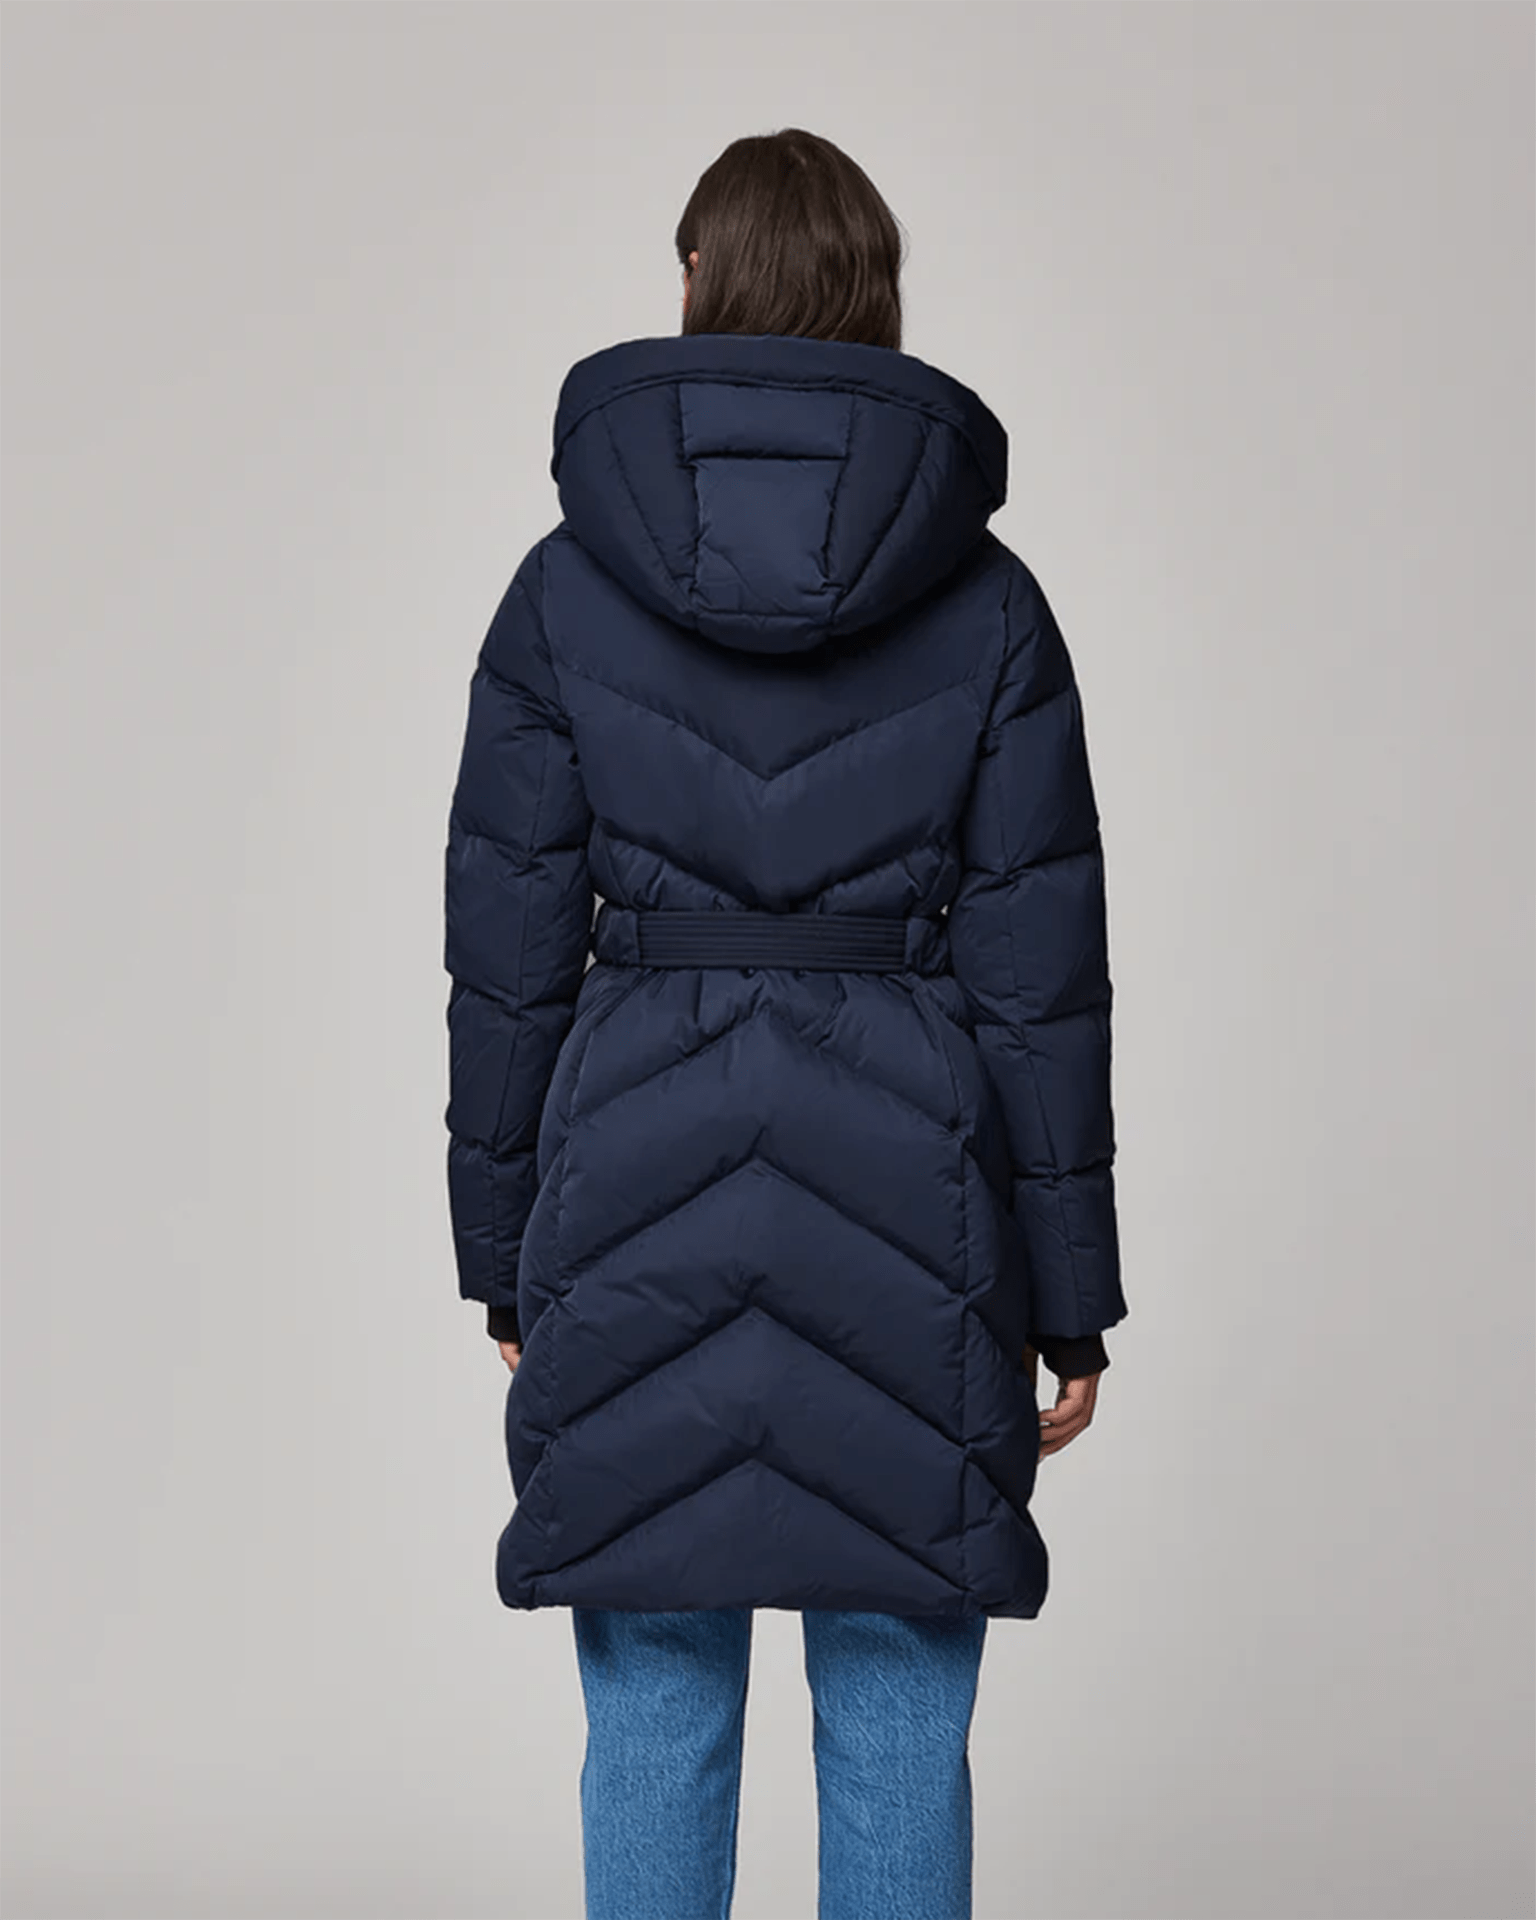 Bryanna Semi-Fitted Knee-Length Puffer in Lapis